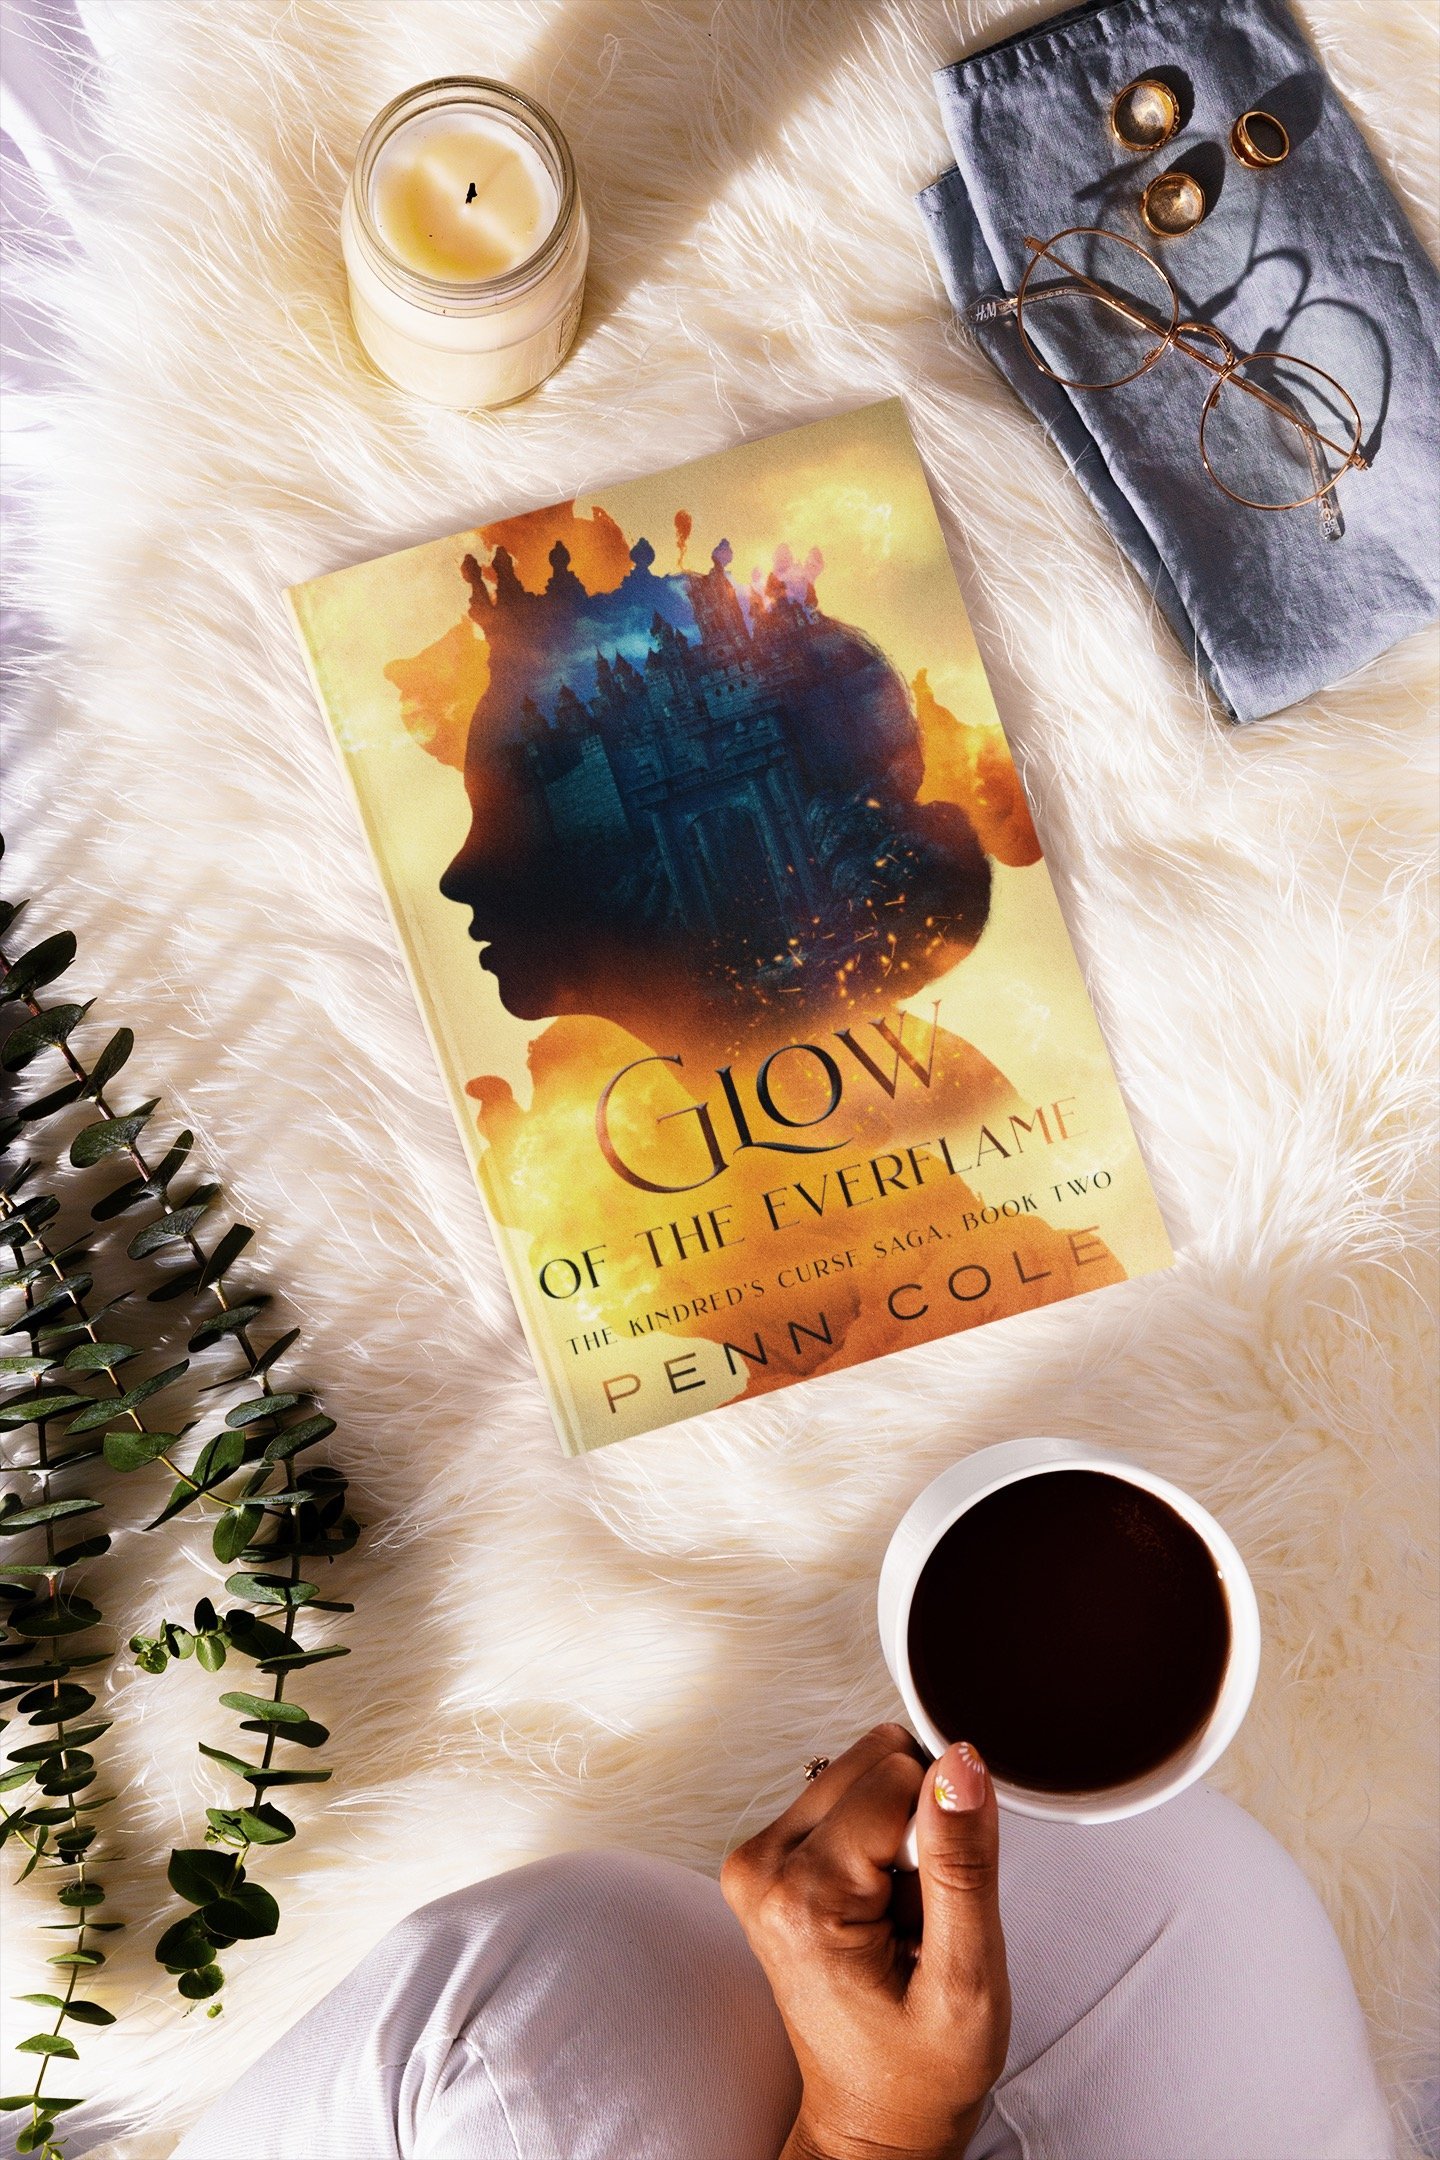 Glow of the Everflame (Kindred's Curse, #2) by Penn Cole